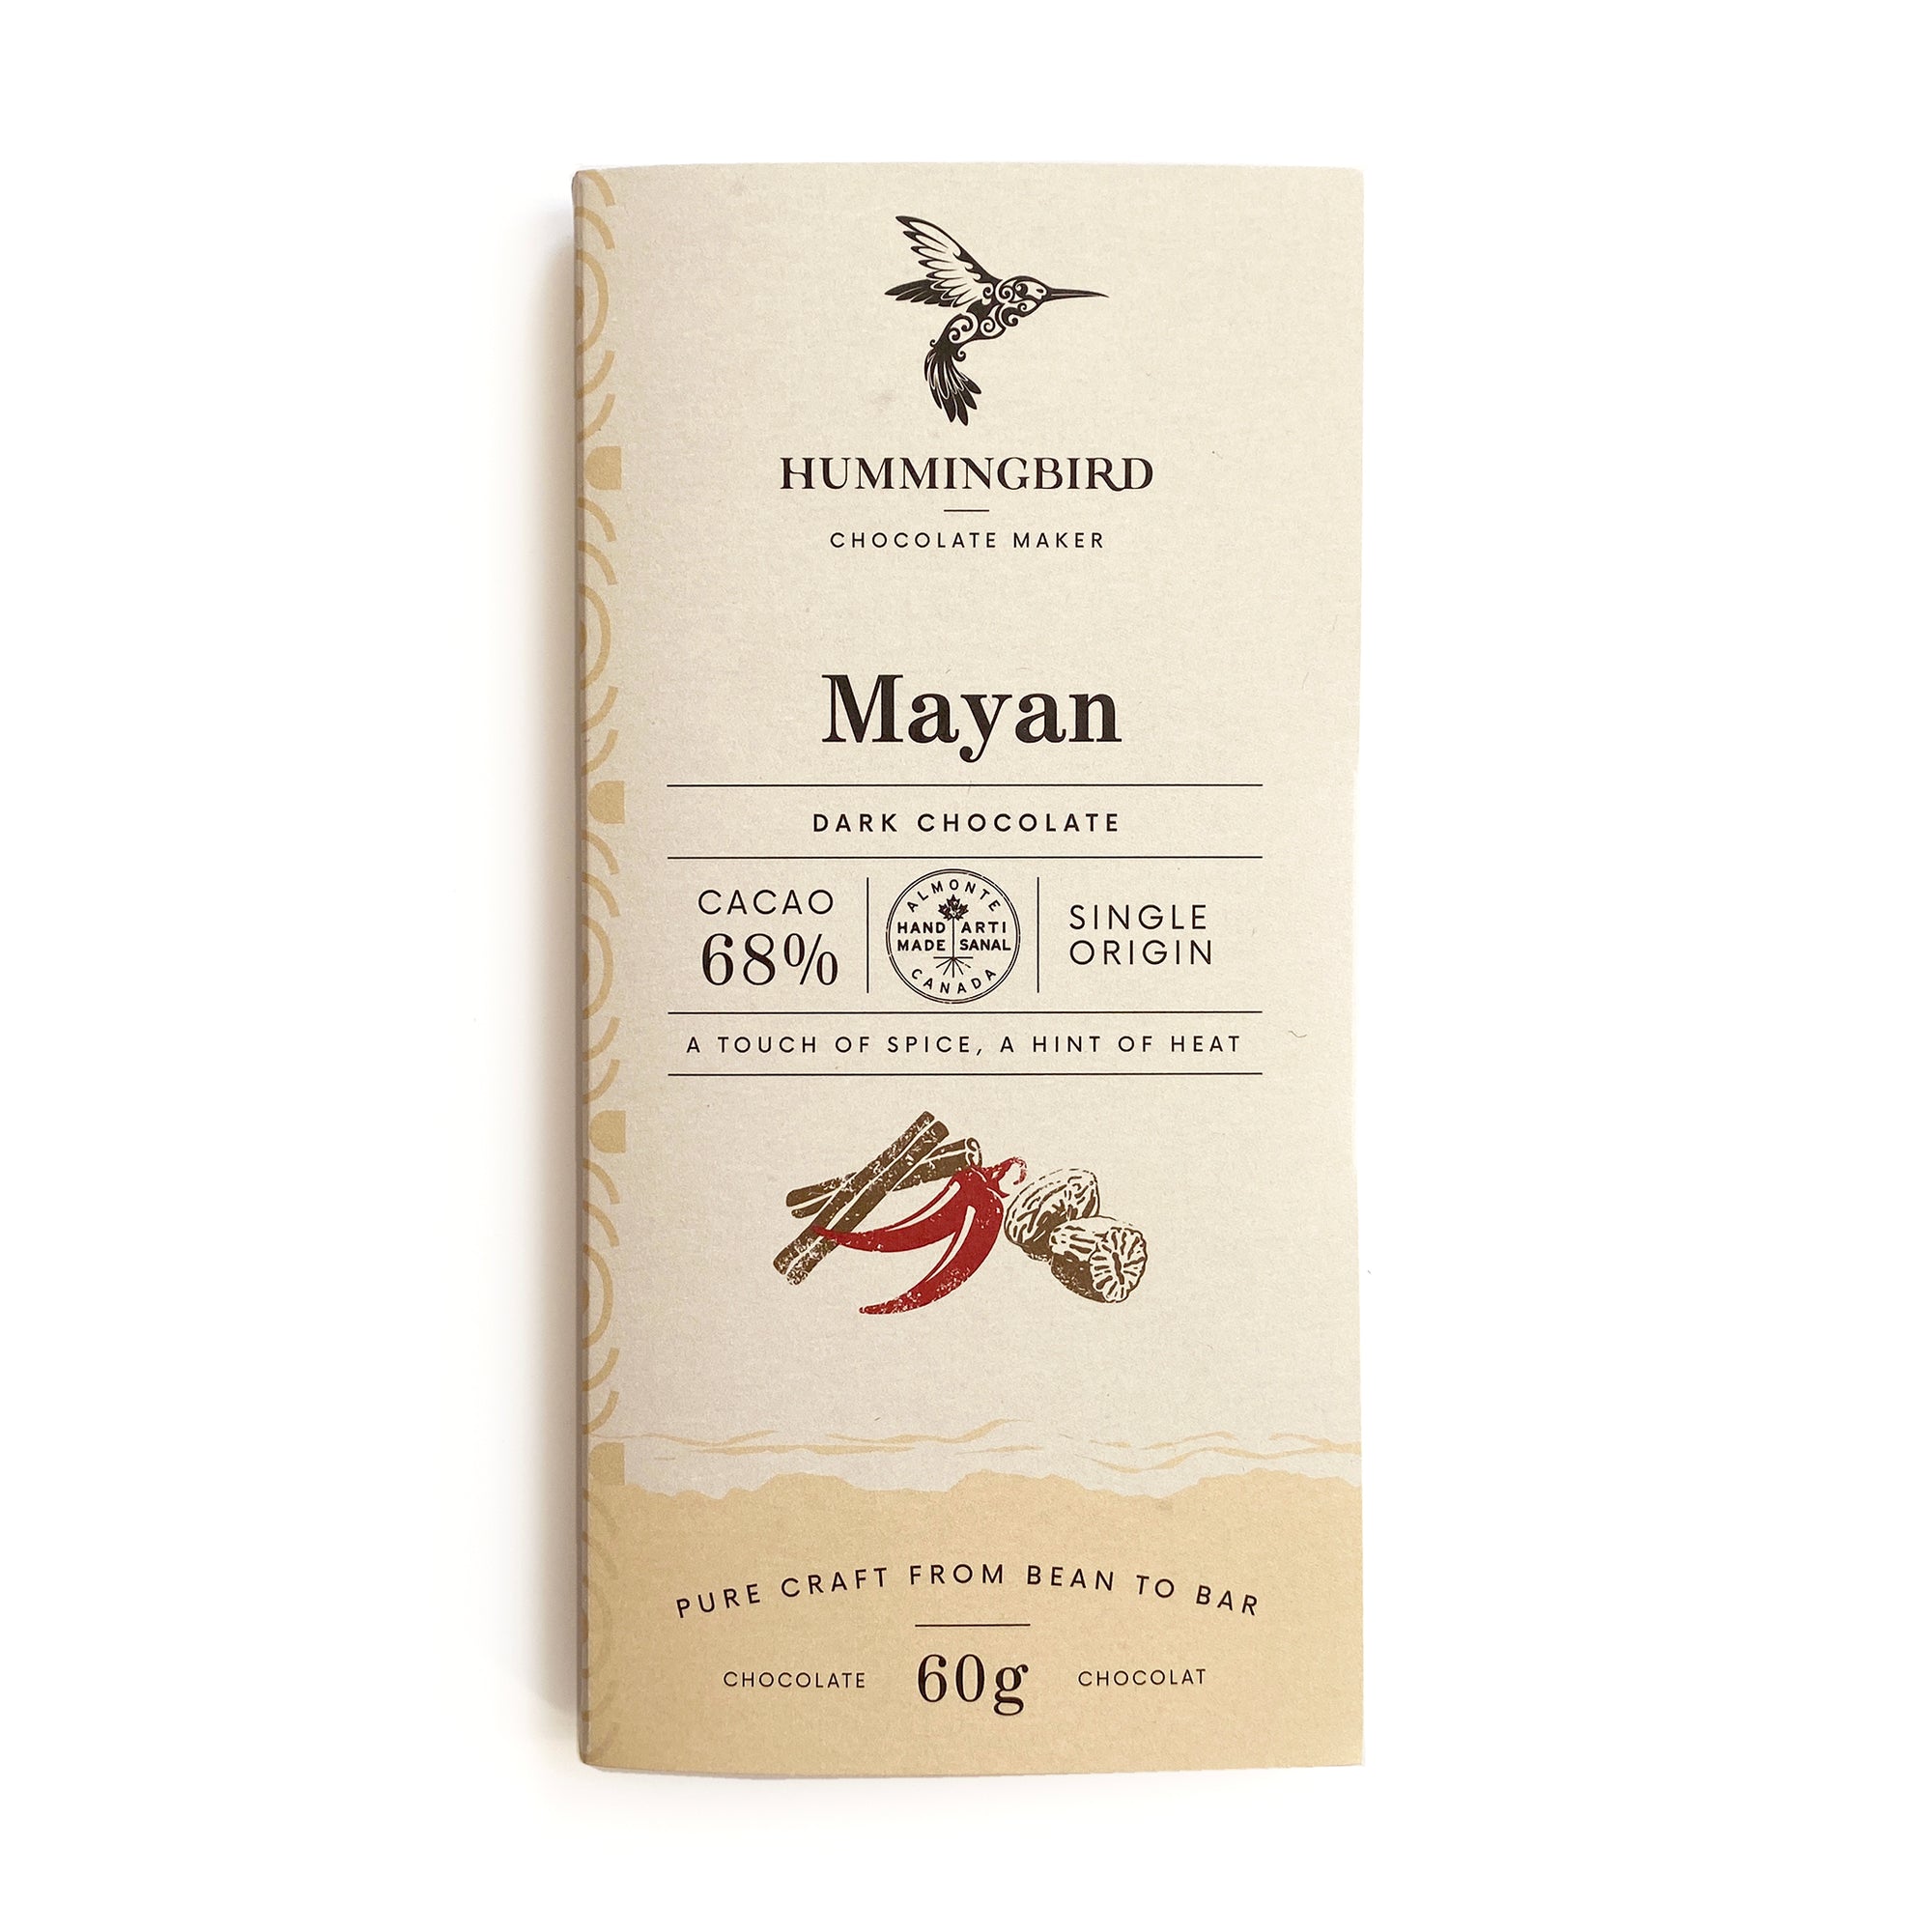 Hummingbird Chocolate Maker, Mayan, dark chocolate - A touch of spice, a hint of heat - Cacao 68% - 60g 